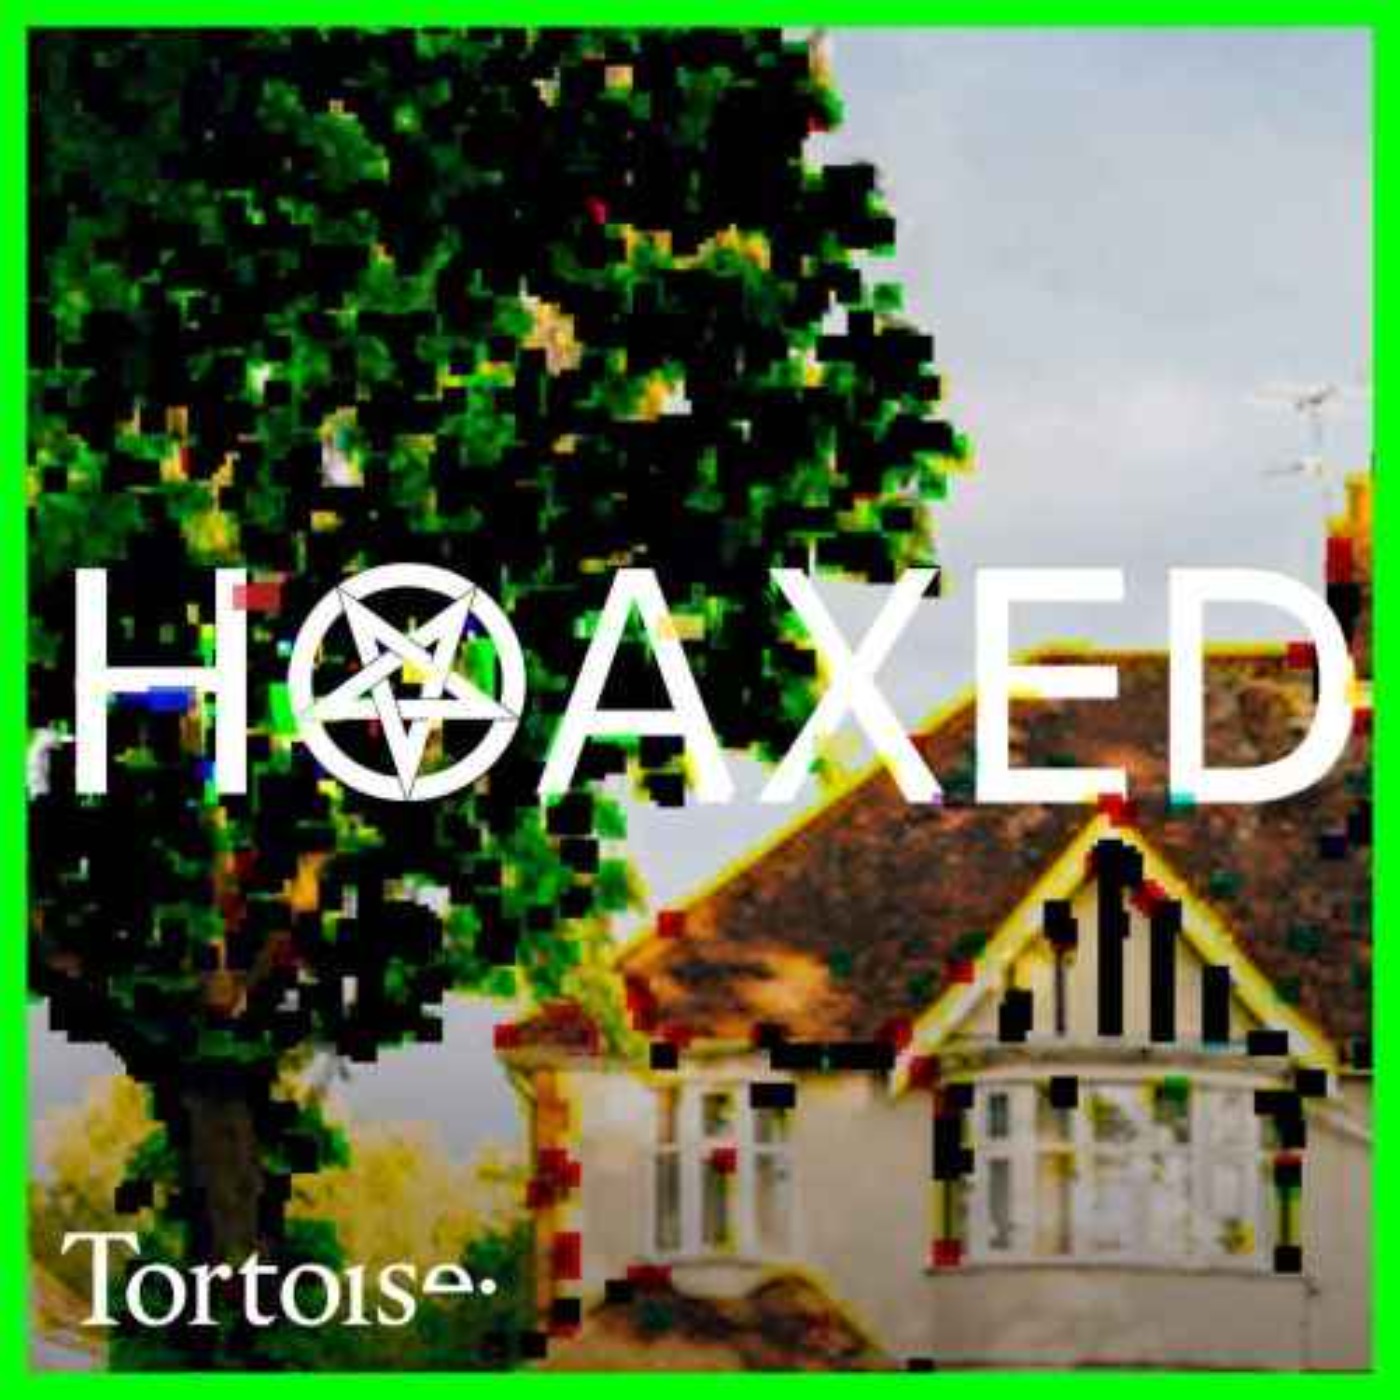 Hoaxed - Episode 1: Secrets and lies